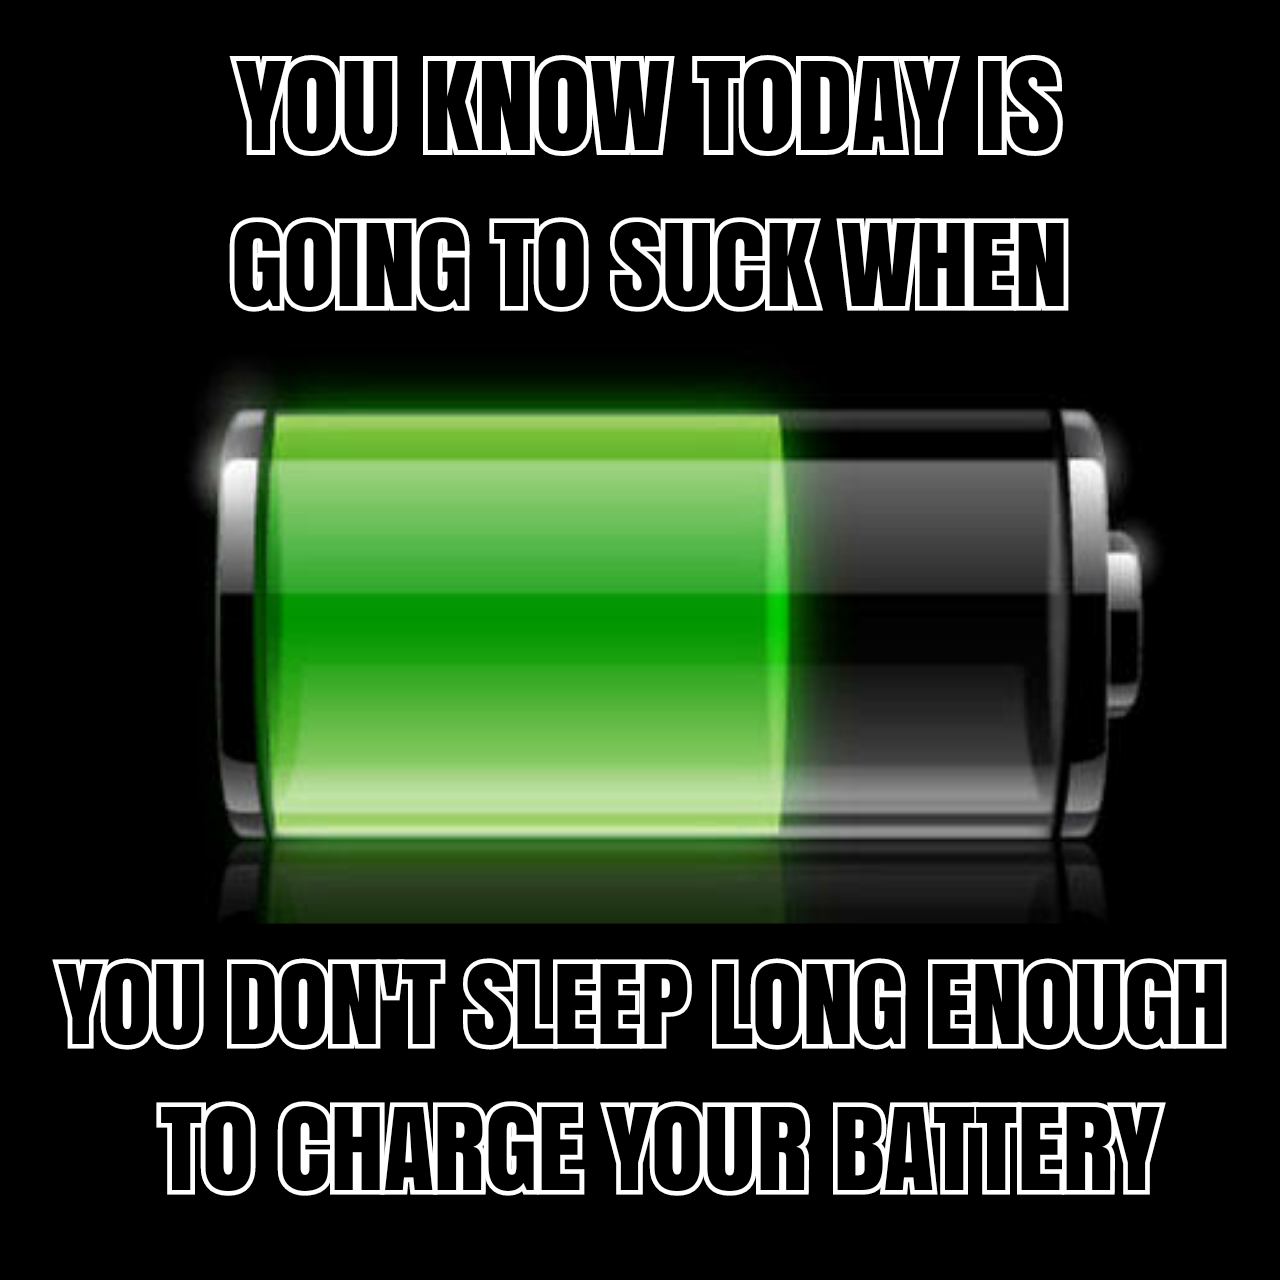 When you sleep so little, your phone didn't have enough time to full charge up.